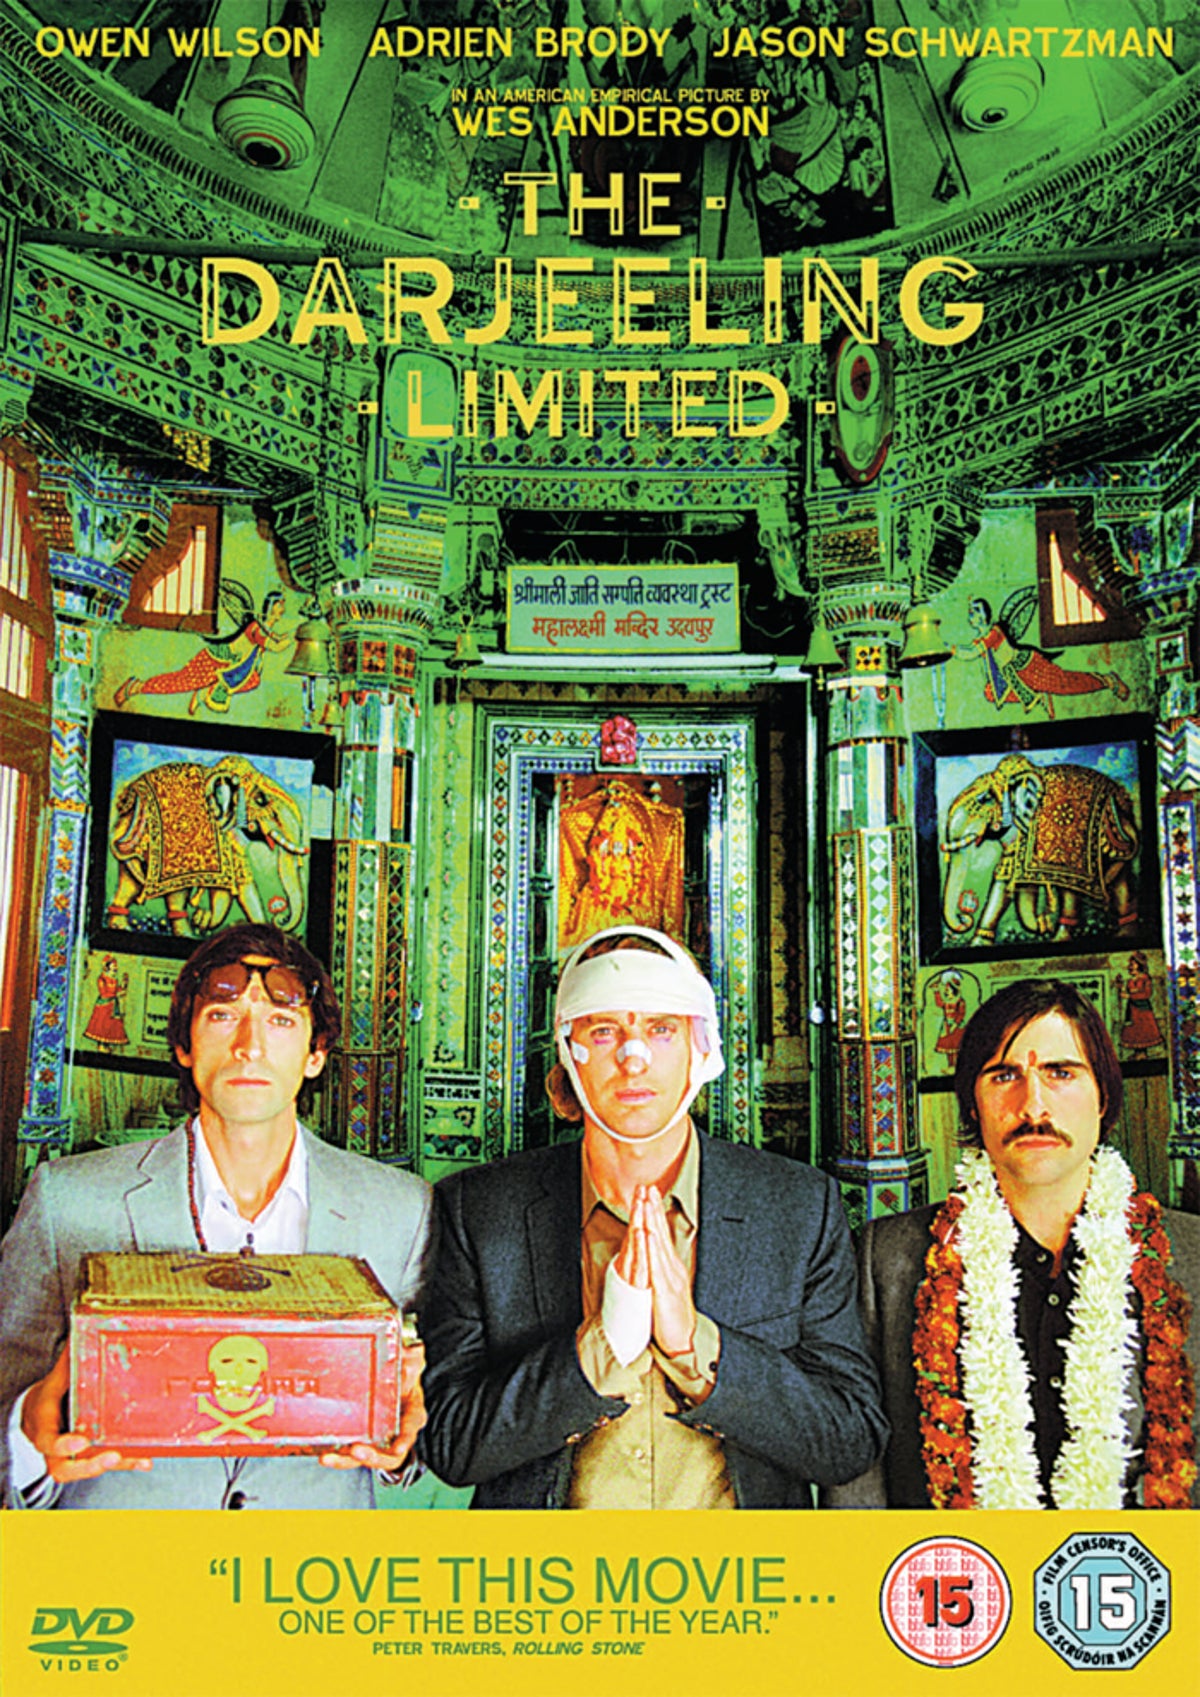 The dream-like world that inspired The Darjeeling Limited is even